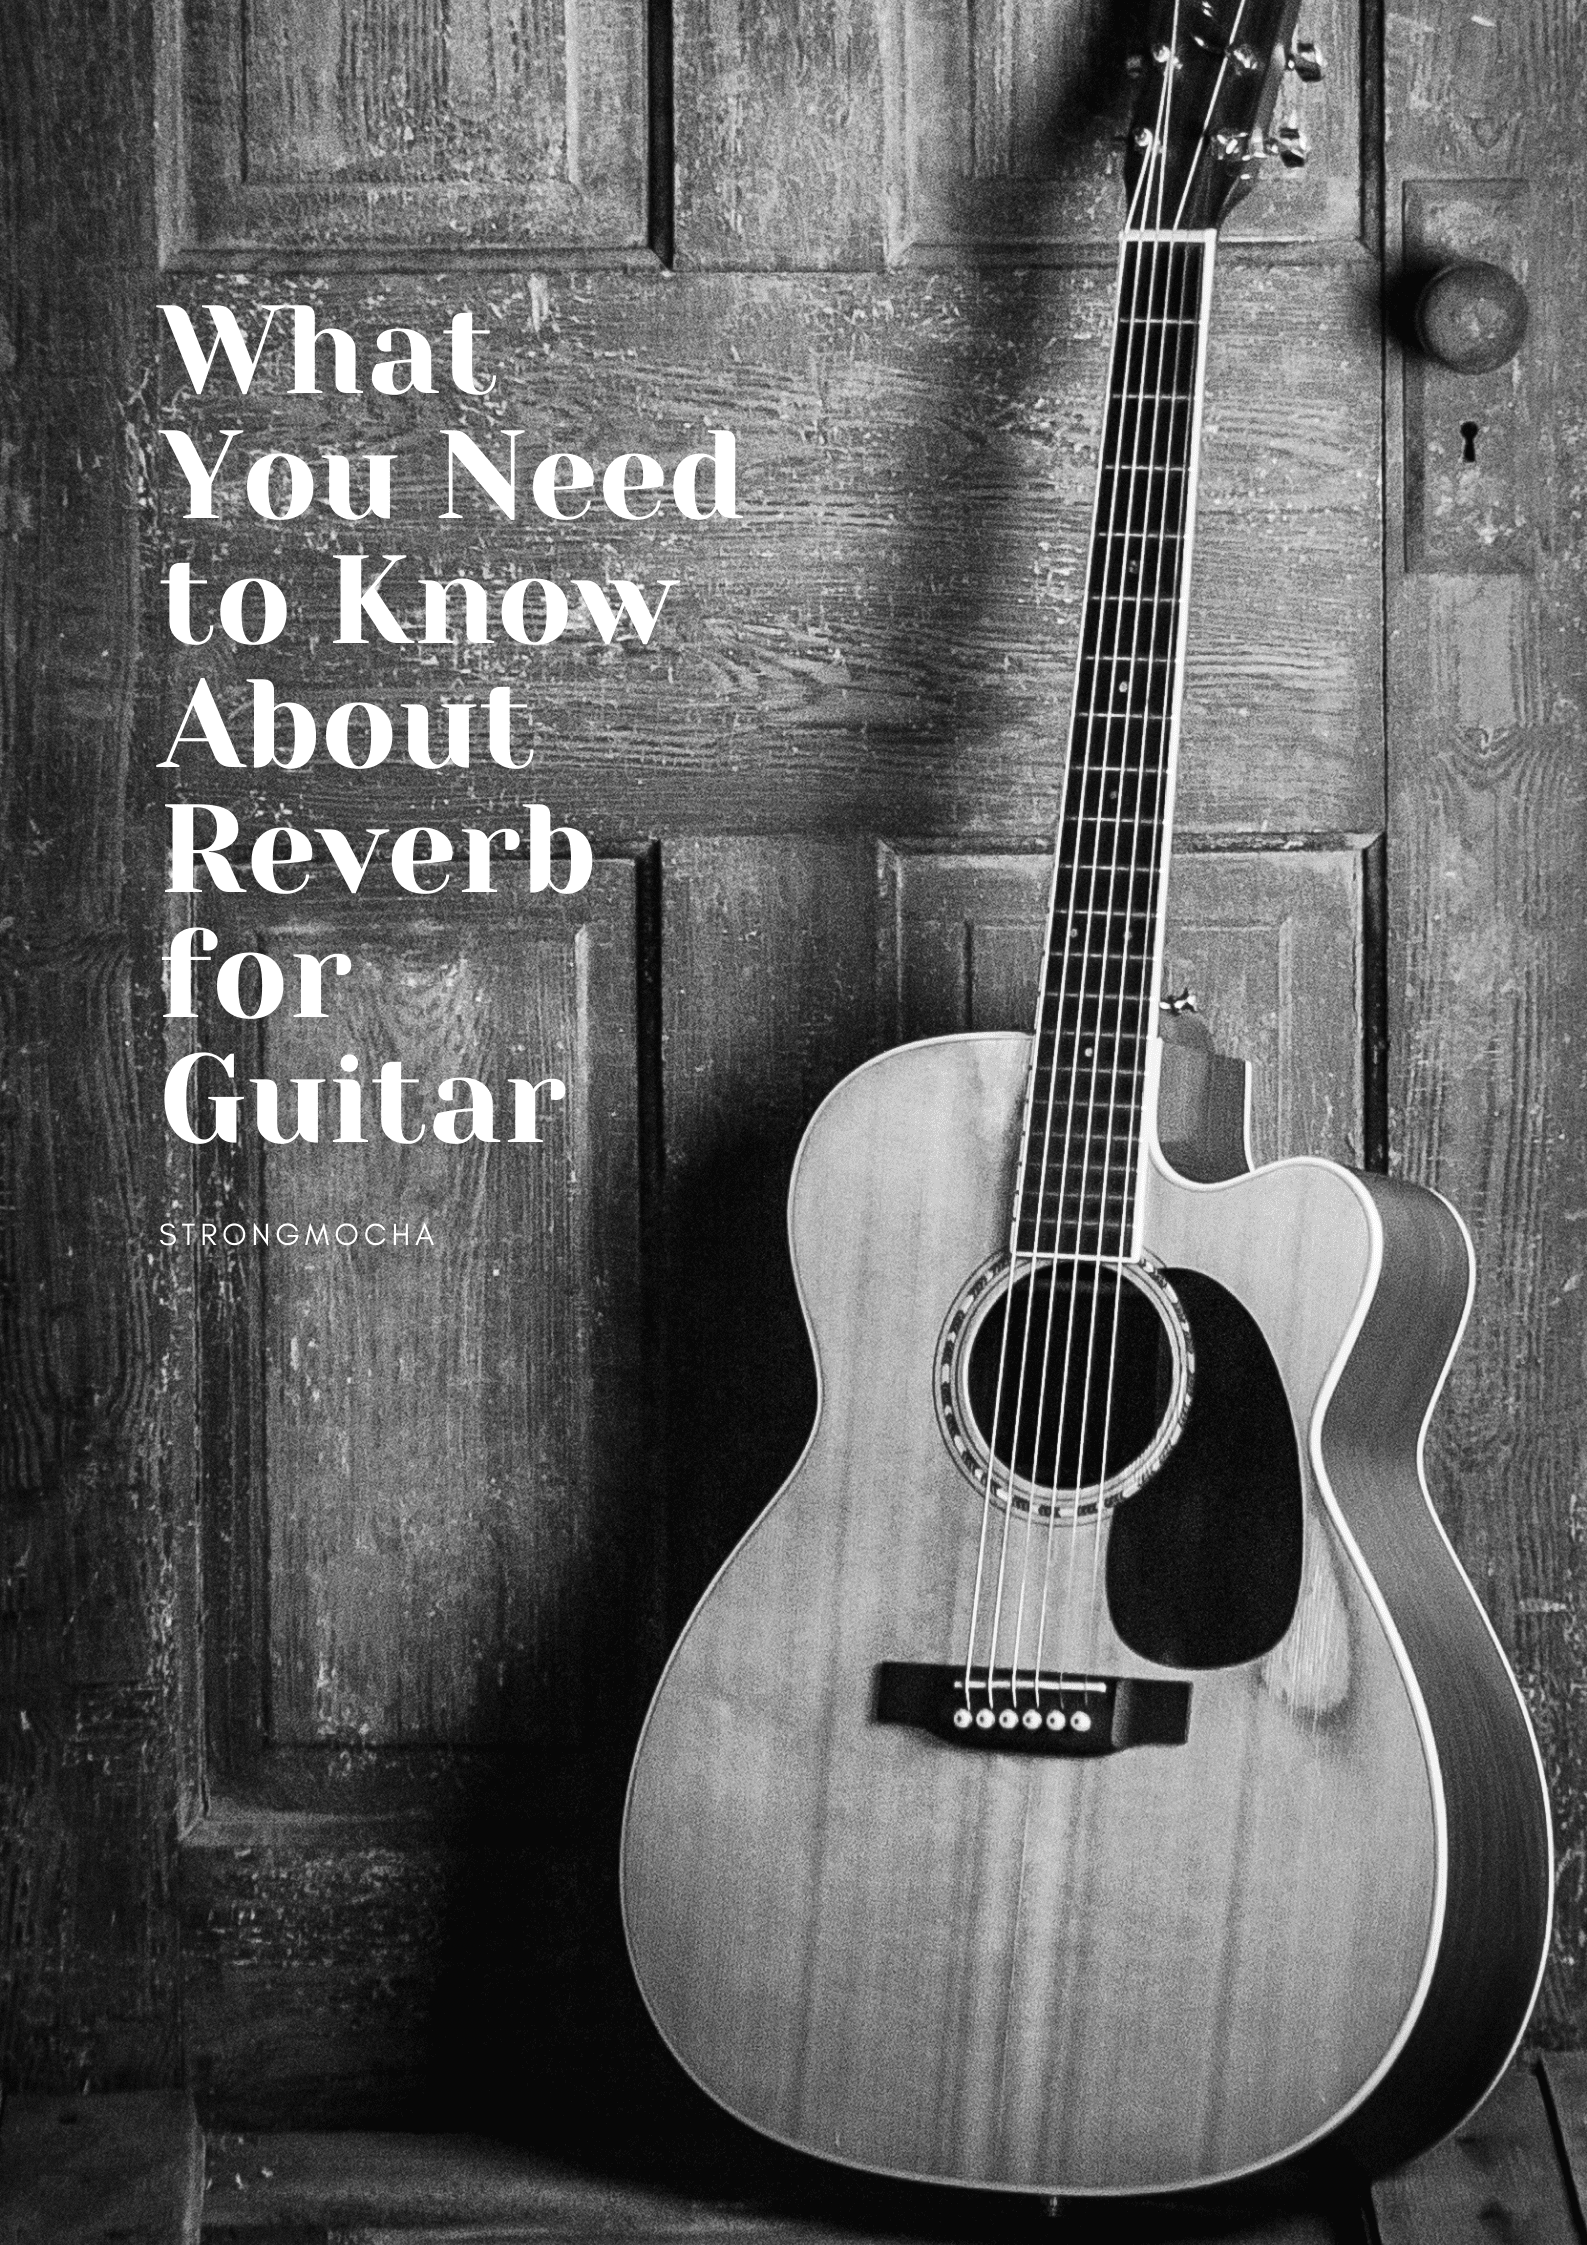 What You Need to Know About Reverb for Guitar